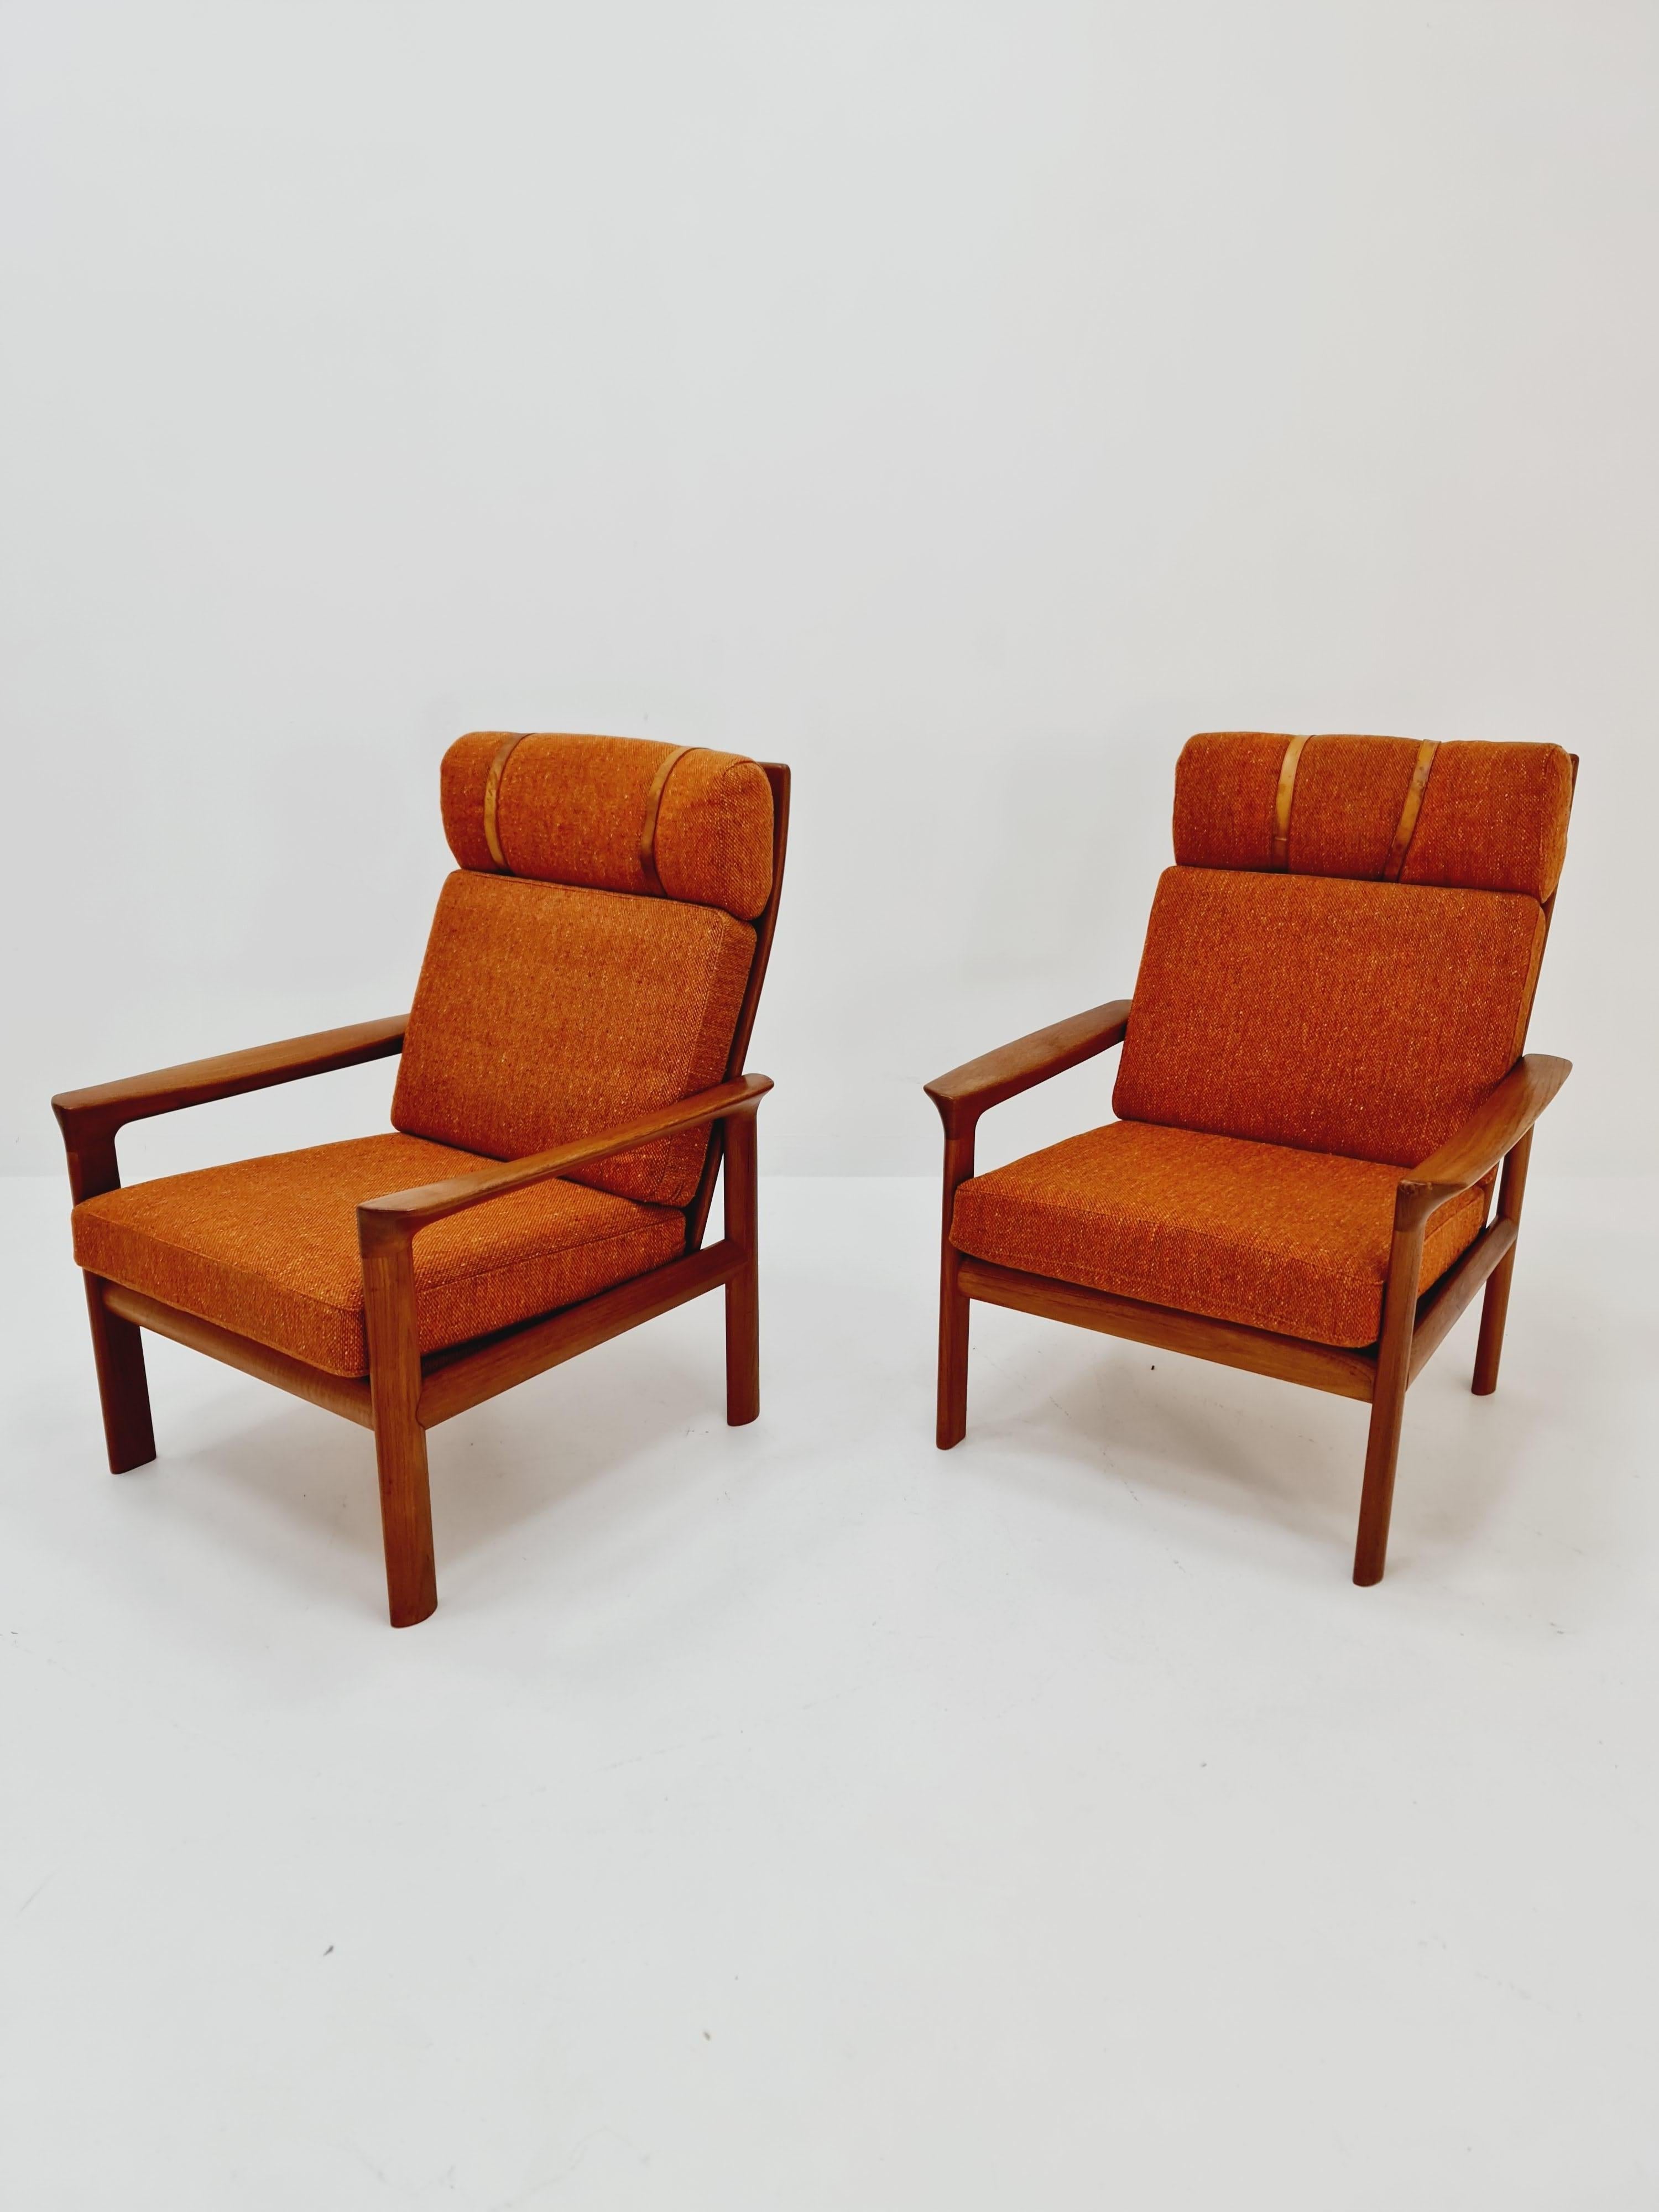 Mid-20th Century Mid century teak easy lounge high back chairs by Sven Ellekaer for Komfort  For Sale